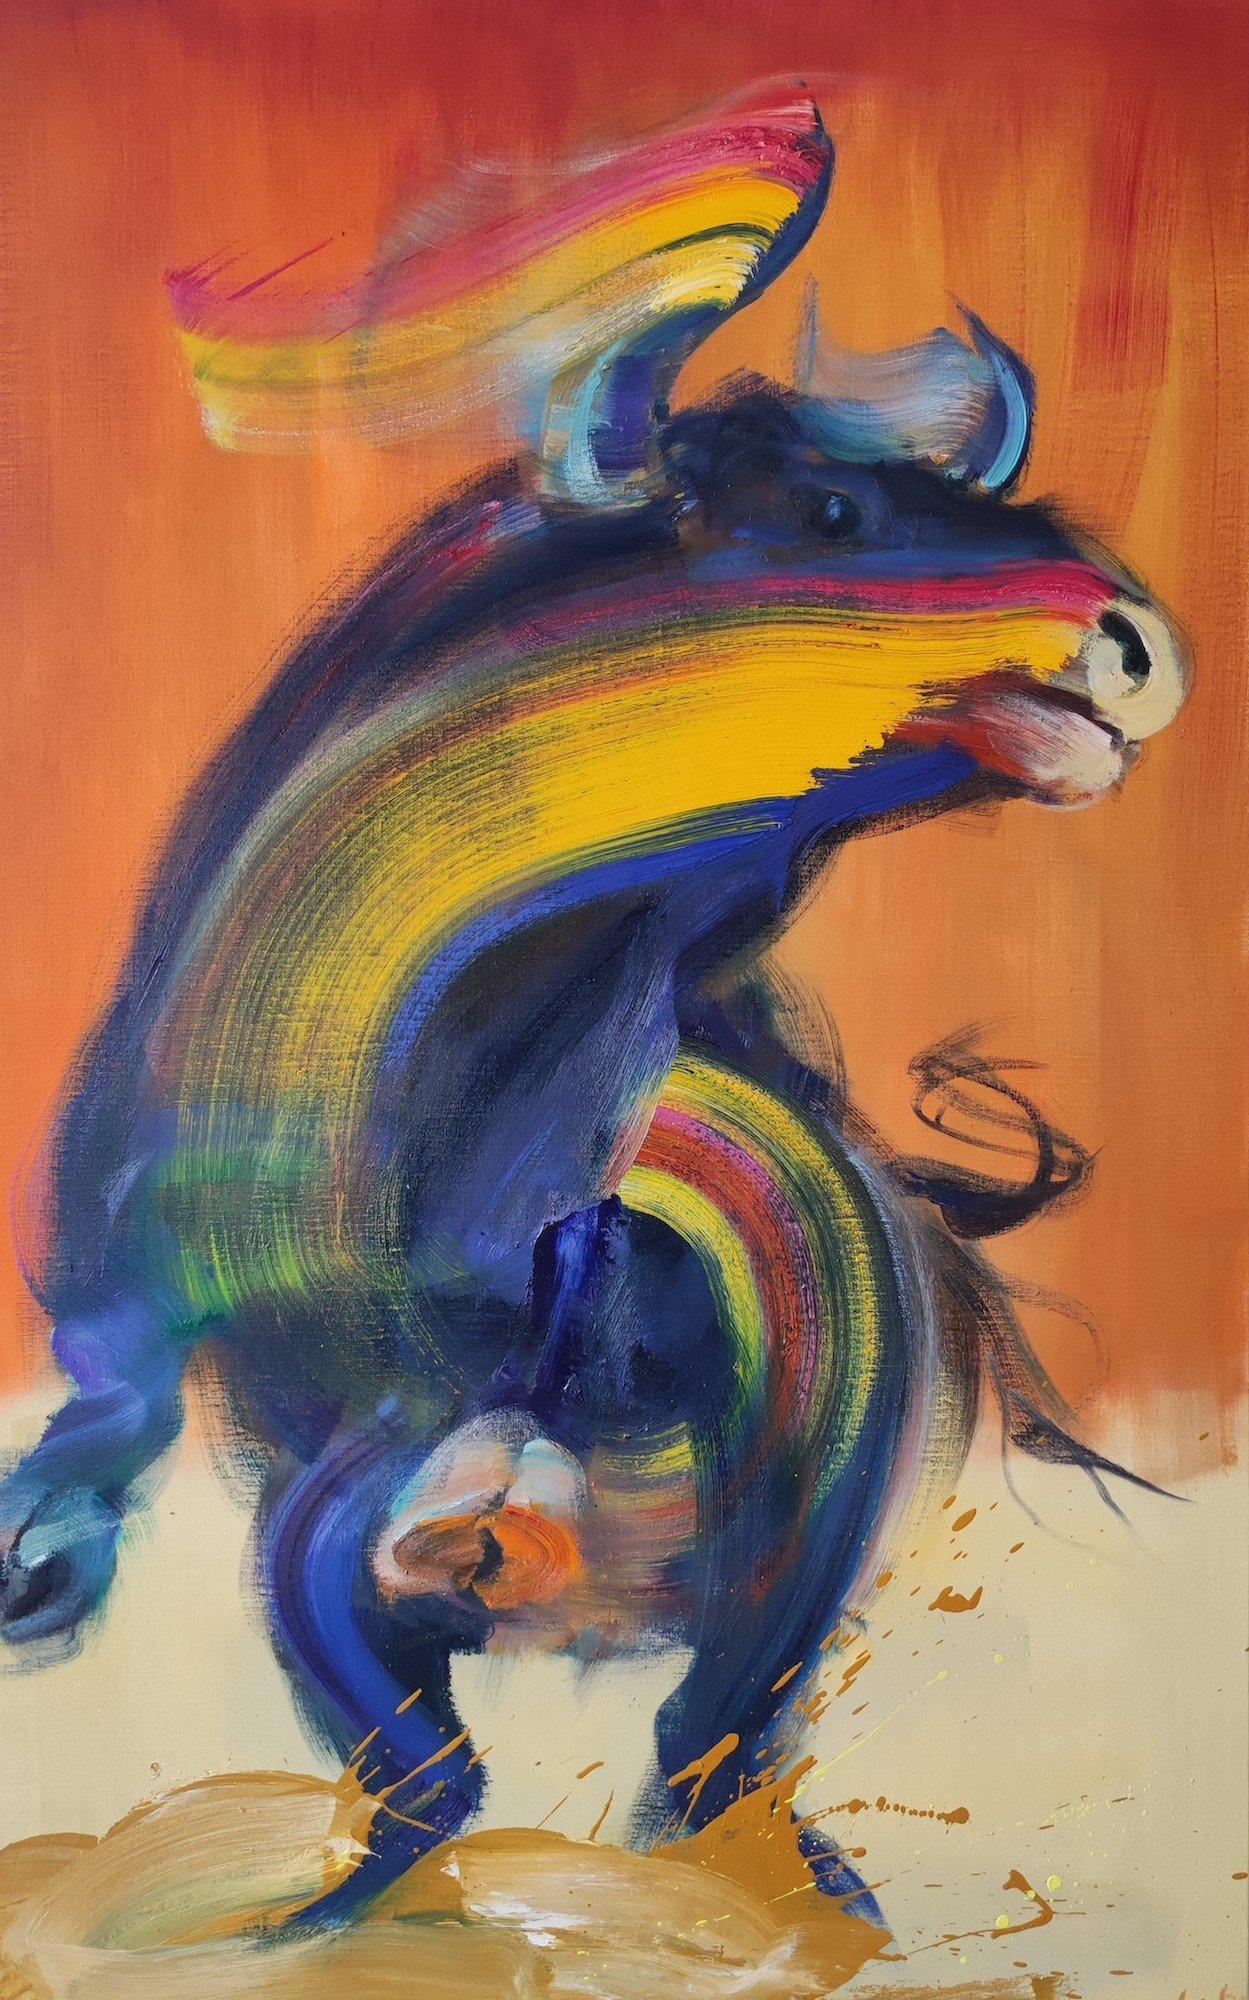 Murcielago (2023) by French contemporary artist Christophe Dupety. Oil on canvas, H 130 x W 81 cm // 51.2 in x 31.9 in.
With this series, the artist is addressing the subject of bullfight. But rather than depicting the confrontation between man and